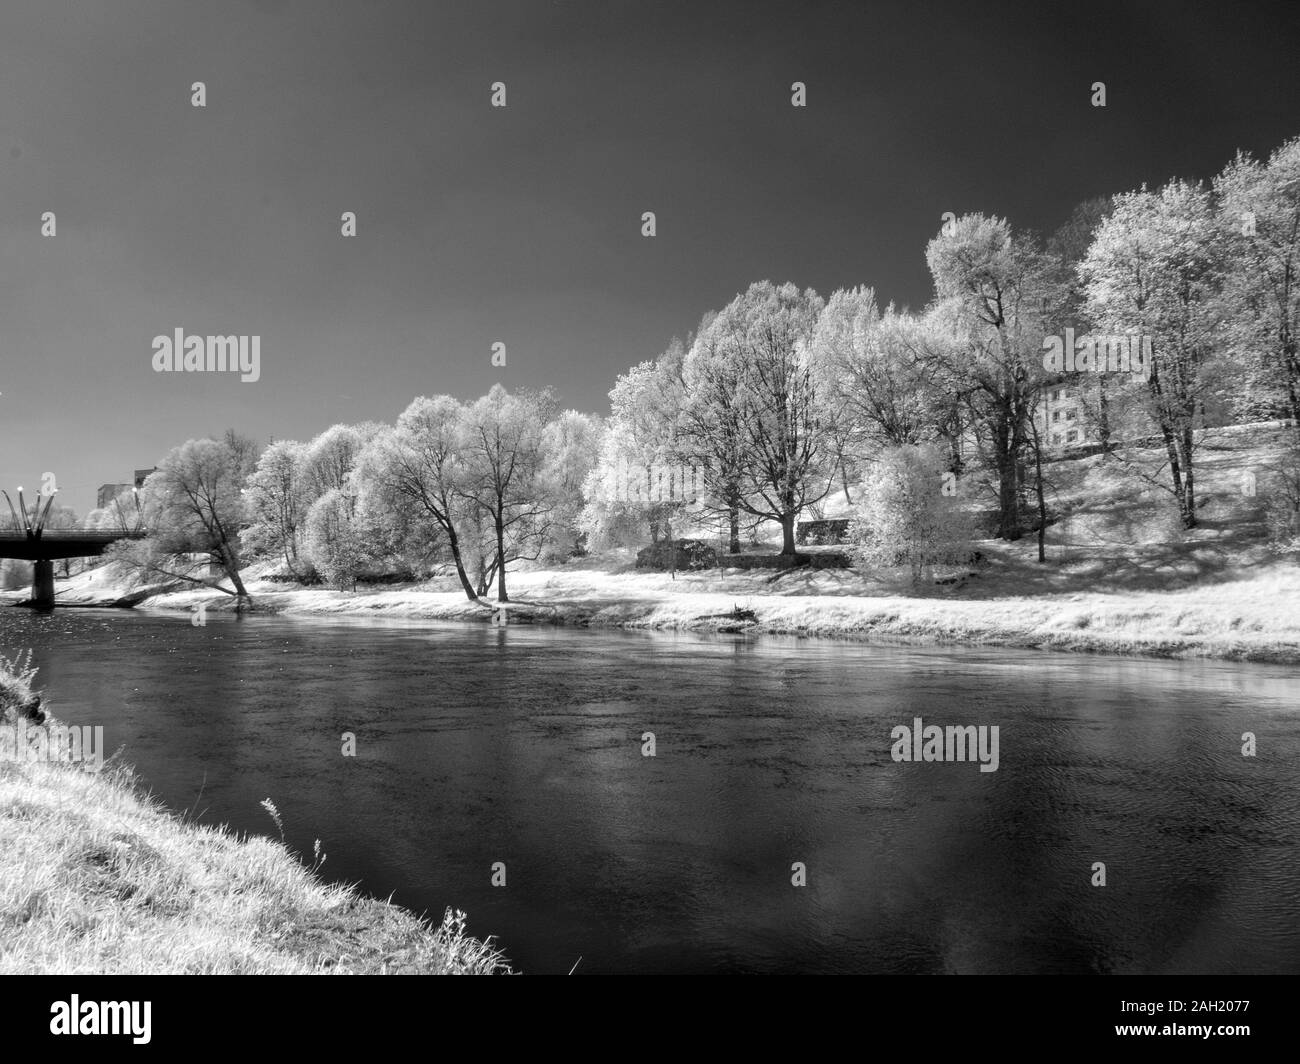 surreal infrared landscape. white trees in the background and a bridge over the river, white grass in the foreground Stock Photo